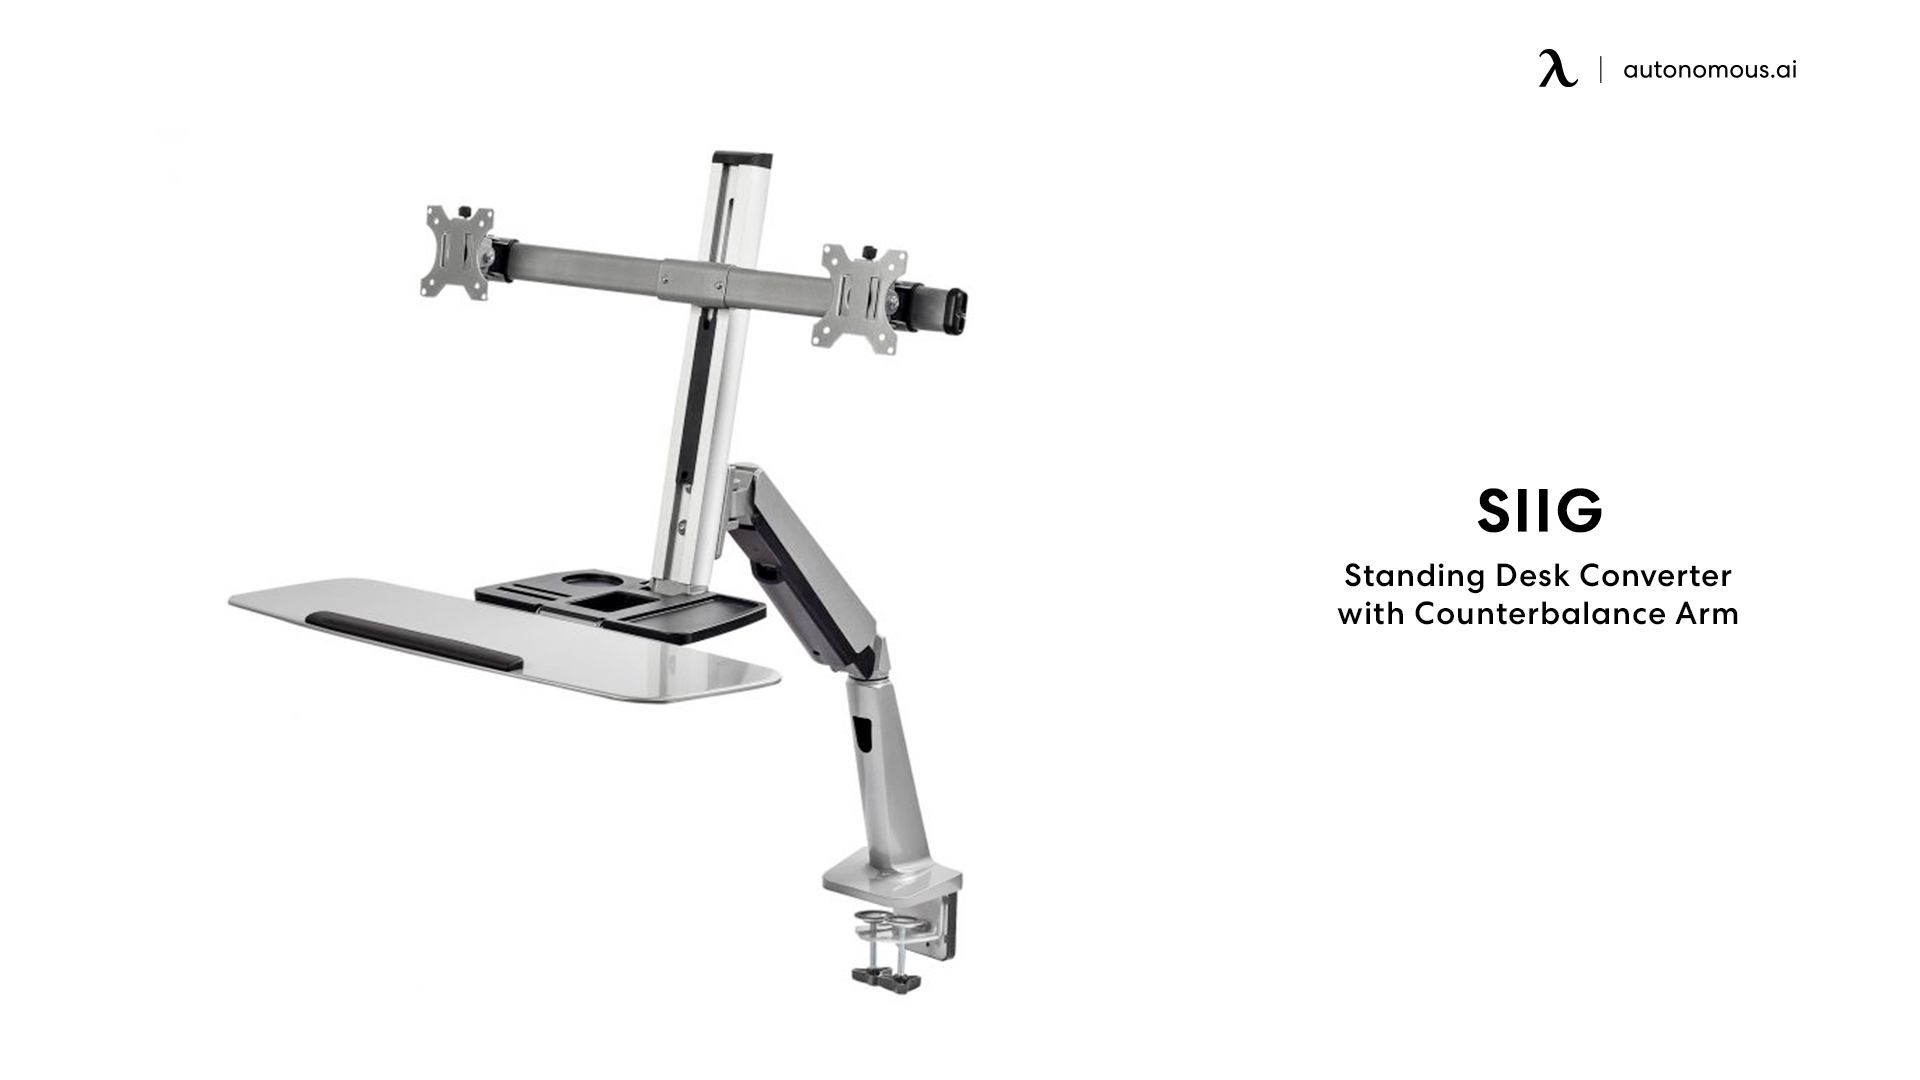 Siig Standing Desk Converter with Counterbalance Arm